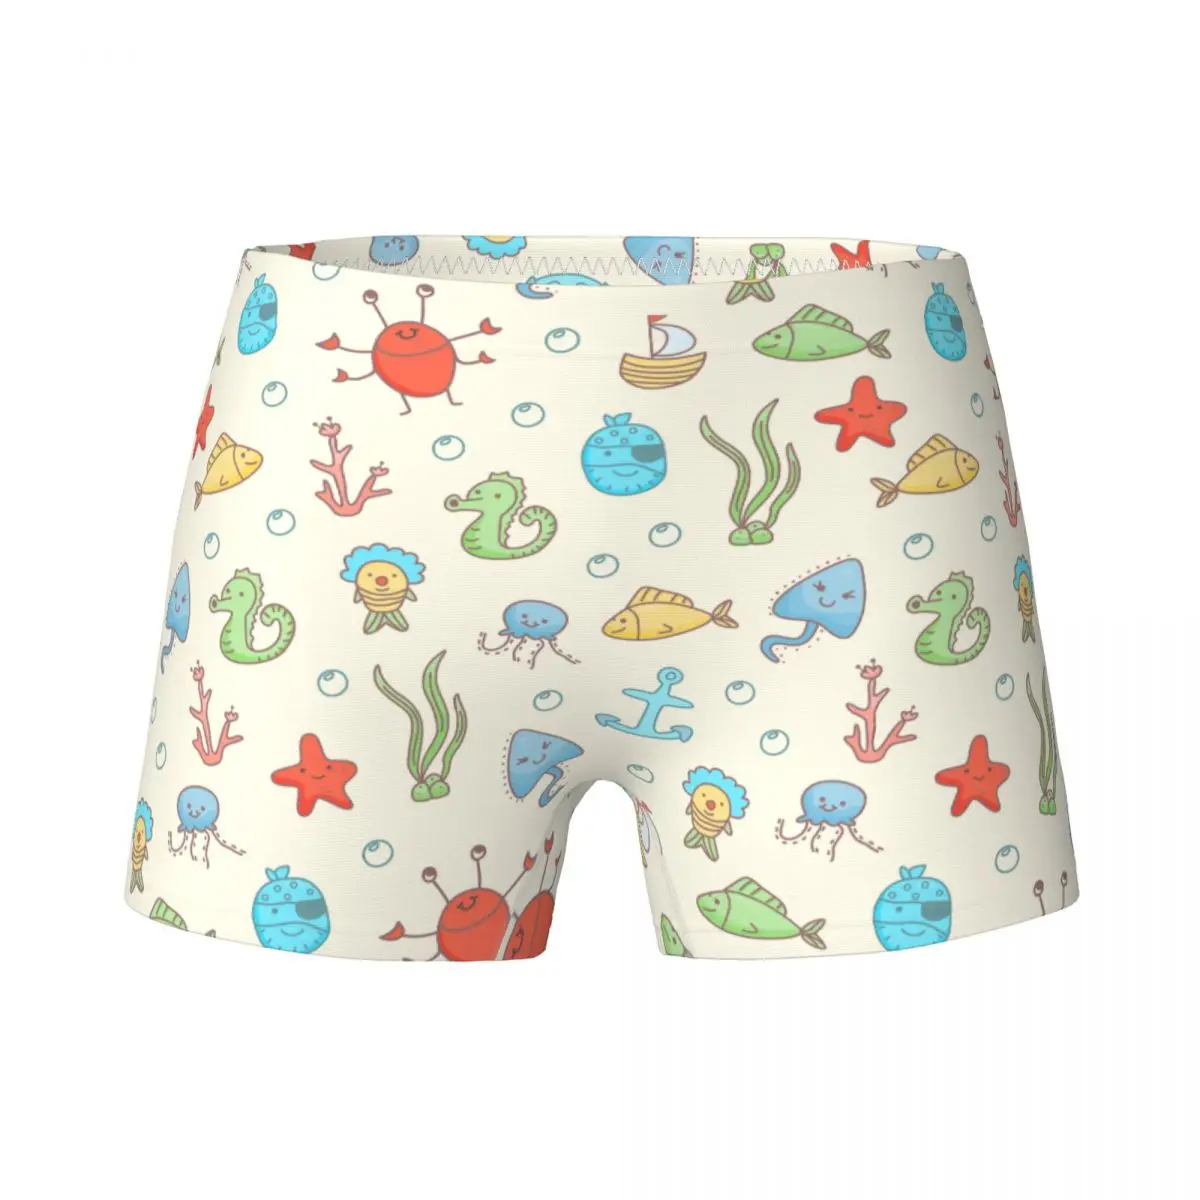 

Youth Girl Octopus Sea Animal Boxer Child Cotton Underwear Kids Teenagers Underpants Soft Briefs 4-15Y